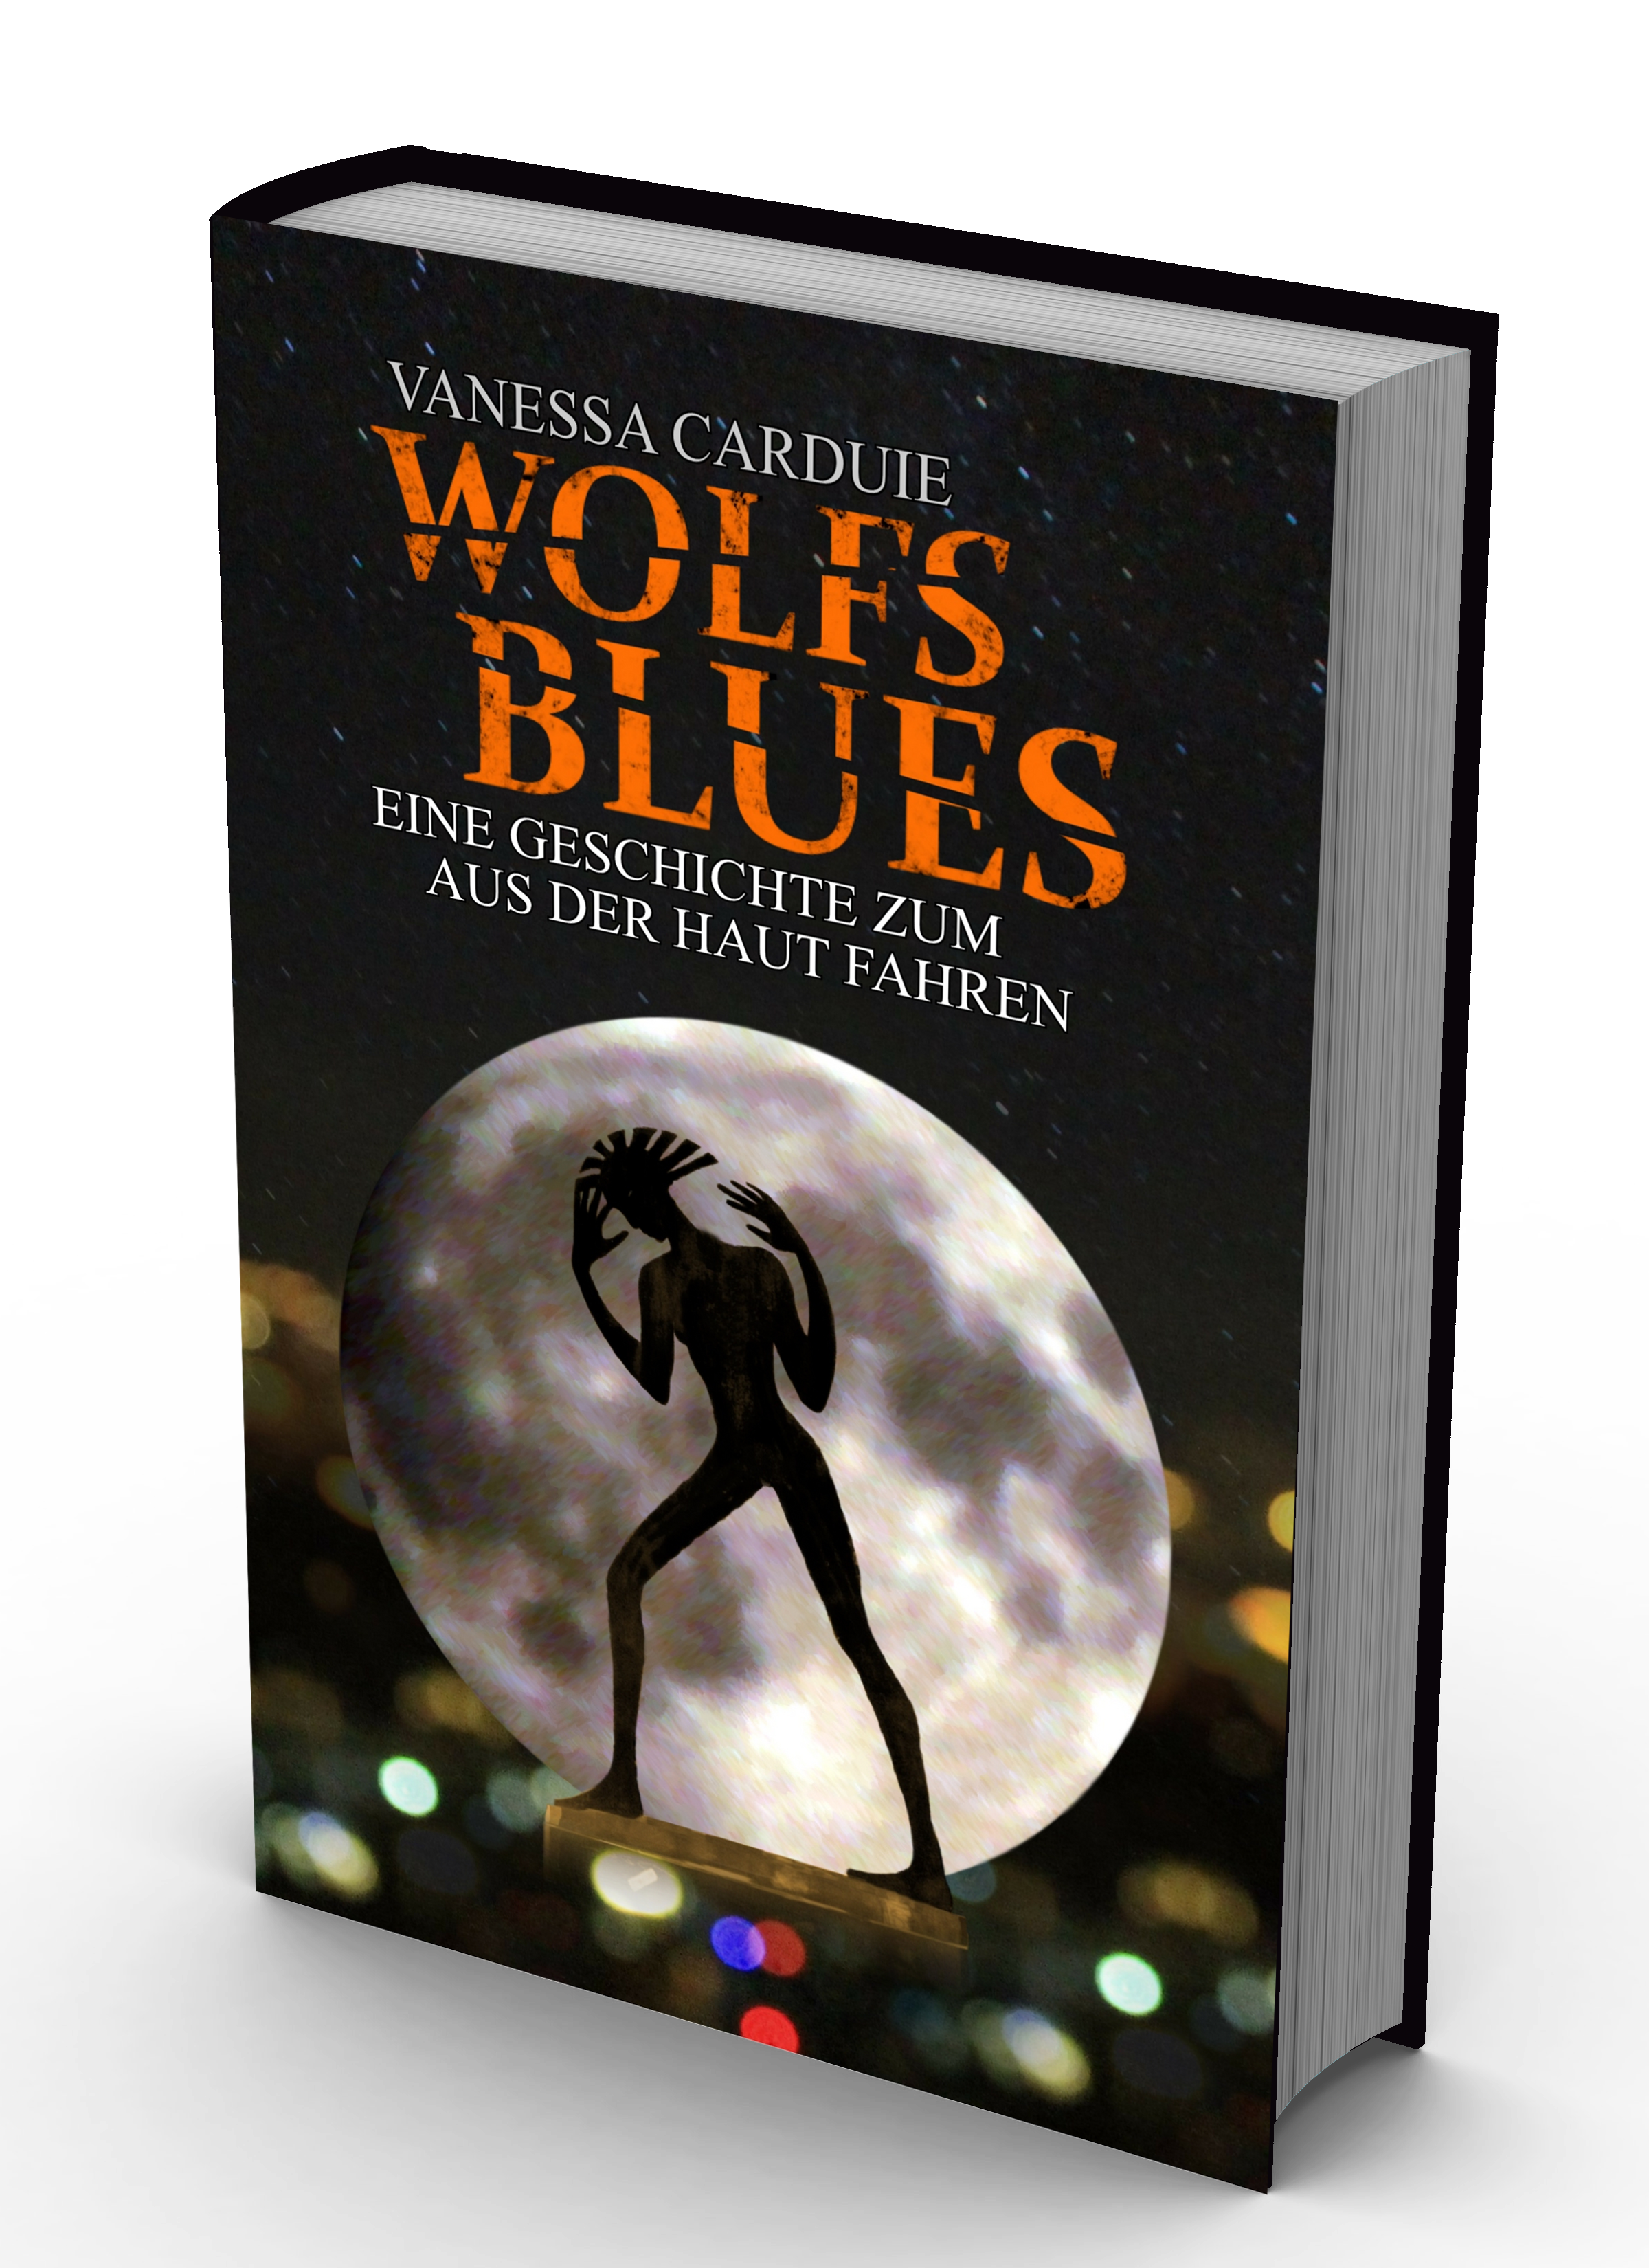 //www.vanessa-carduie.com/wp-content/uploads/07_book-Wolfsblues-1-e1563230268866.png